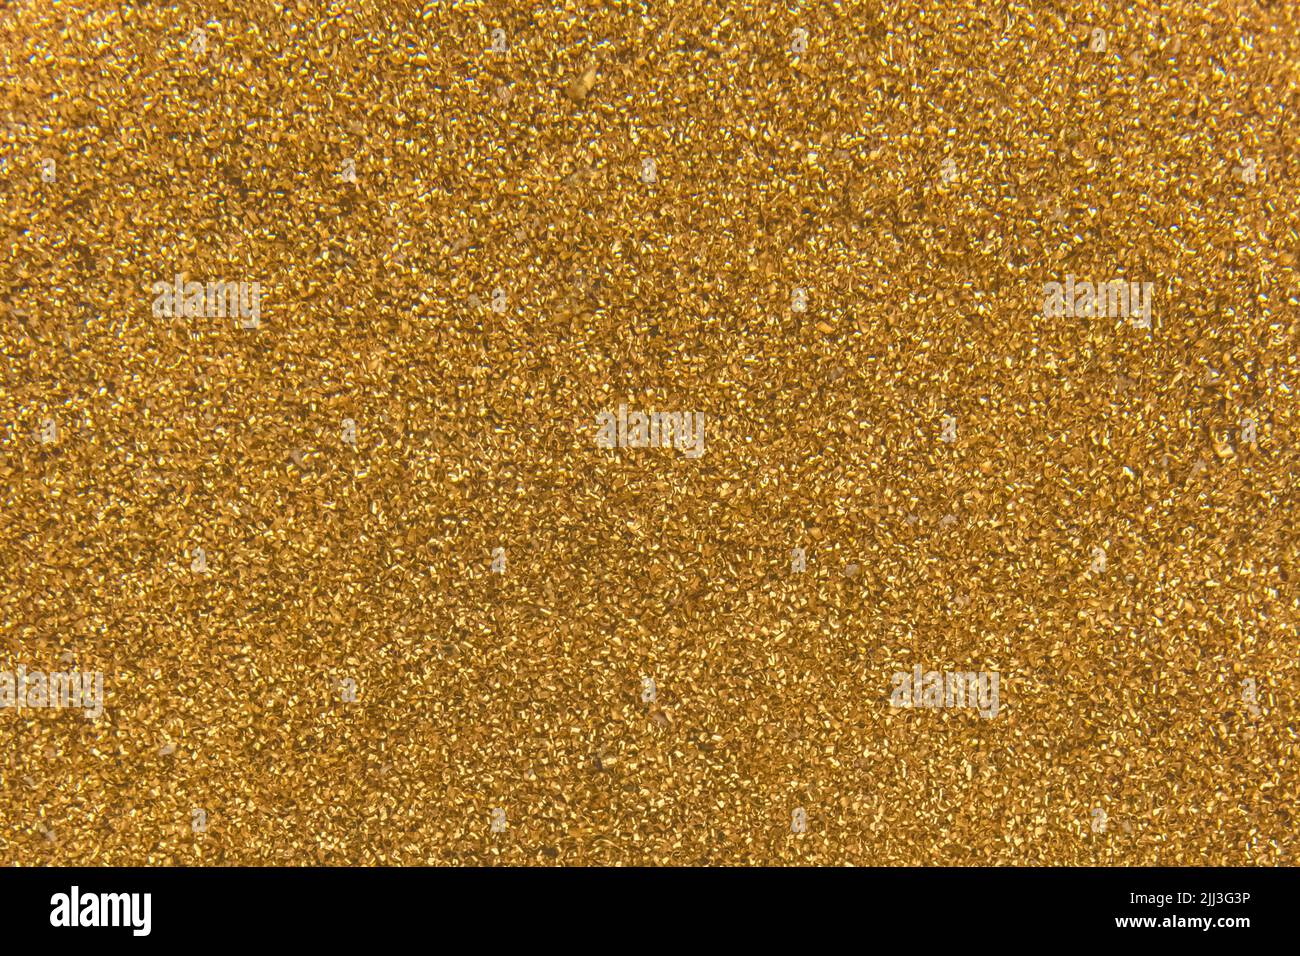 Golden yellow metal shavings waste steel recycling iron texture background. Stock Photo